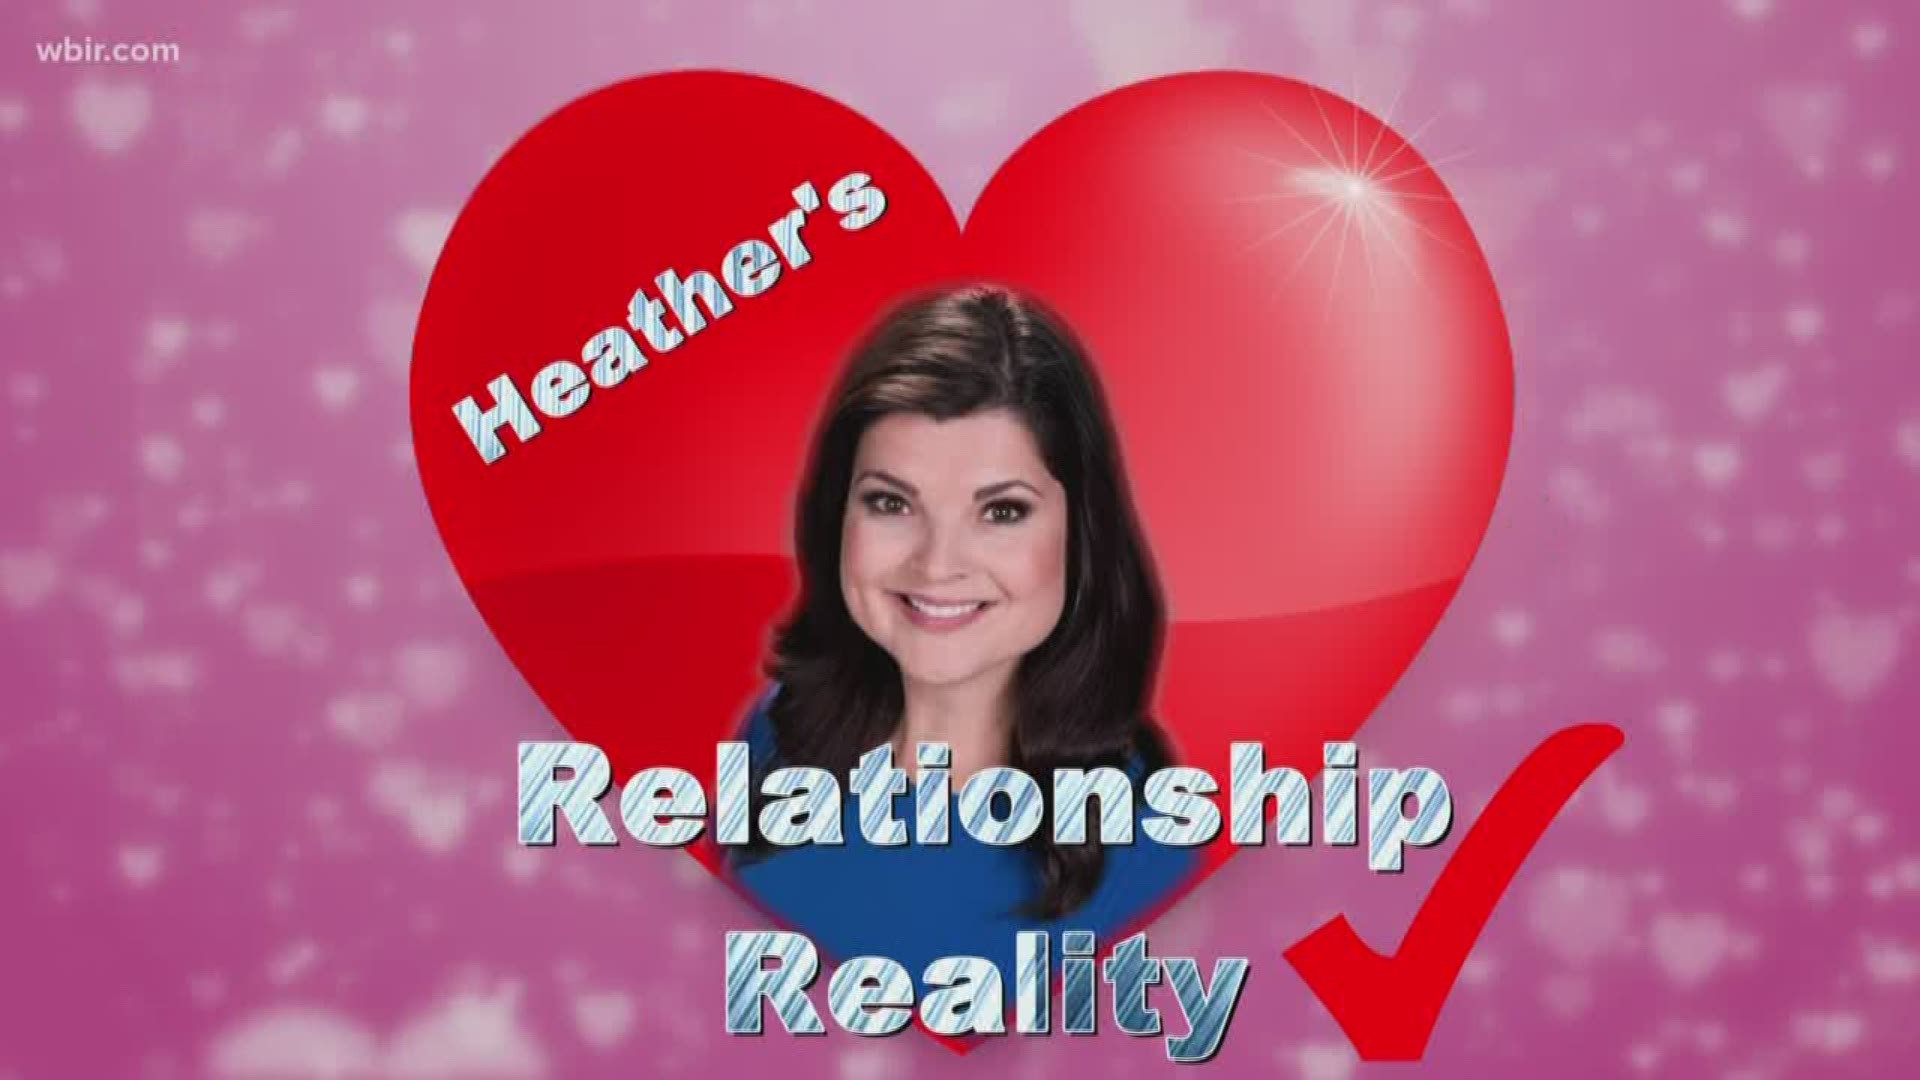 It's time for Heather's Relationship Reality Check! And in this segment, Heather asks how often couples get into major arguments.